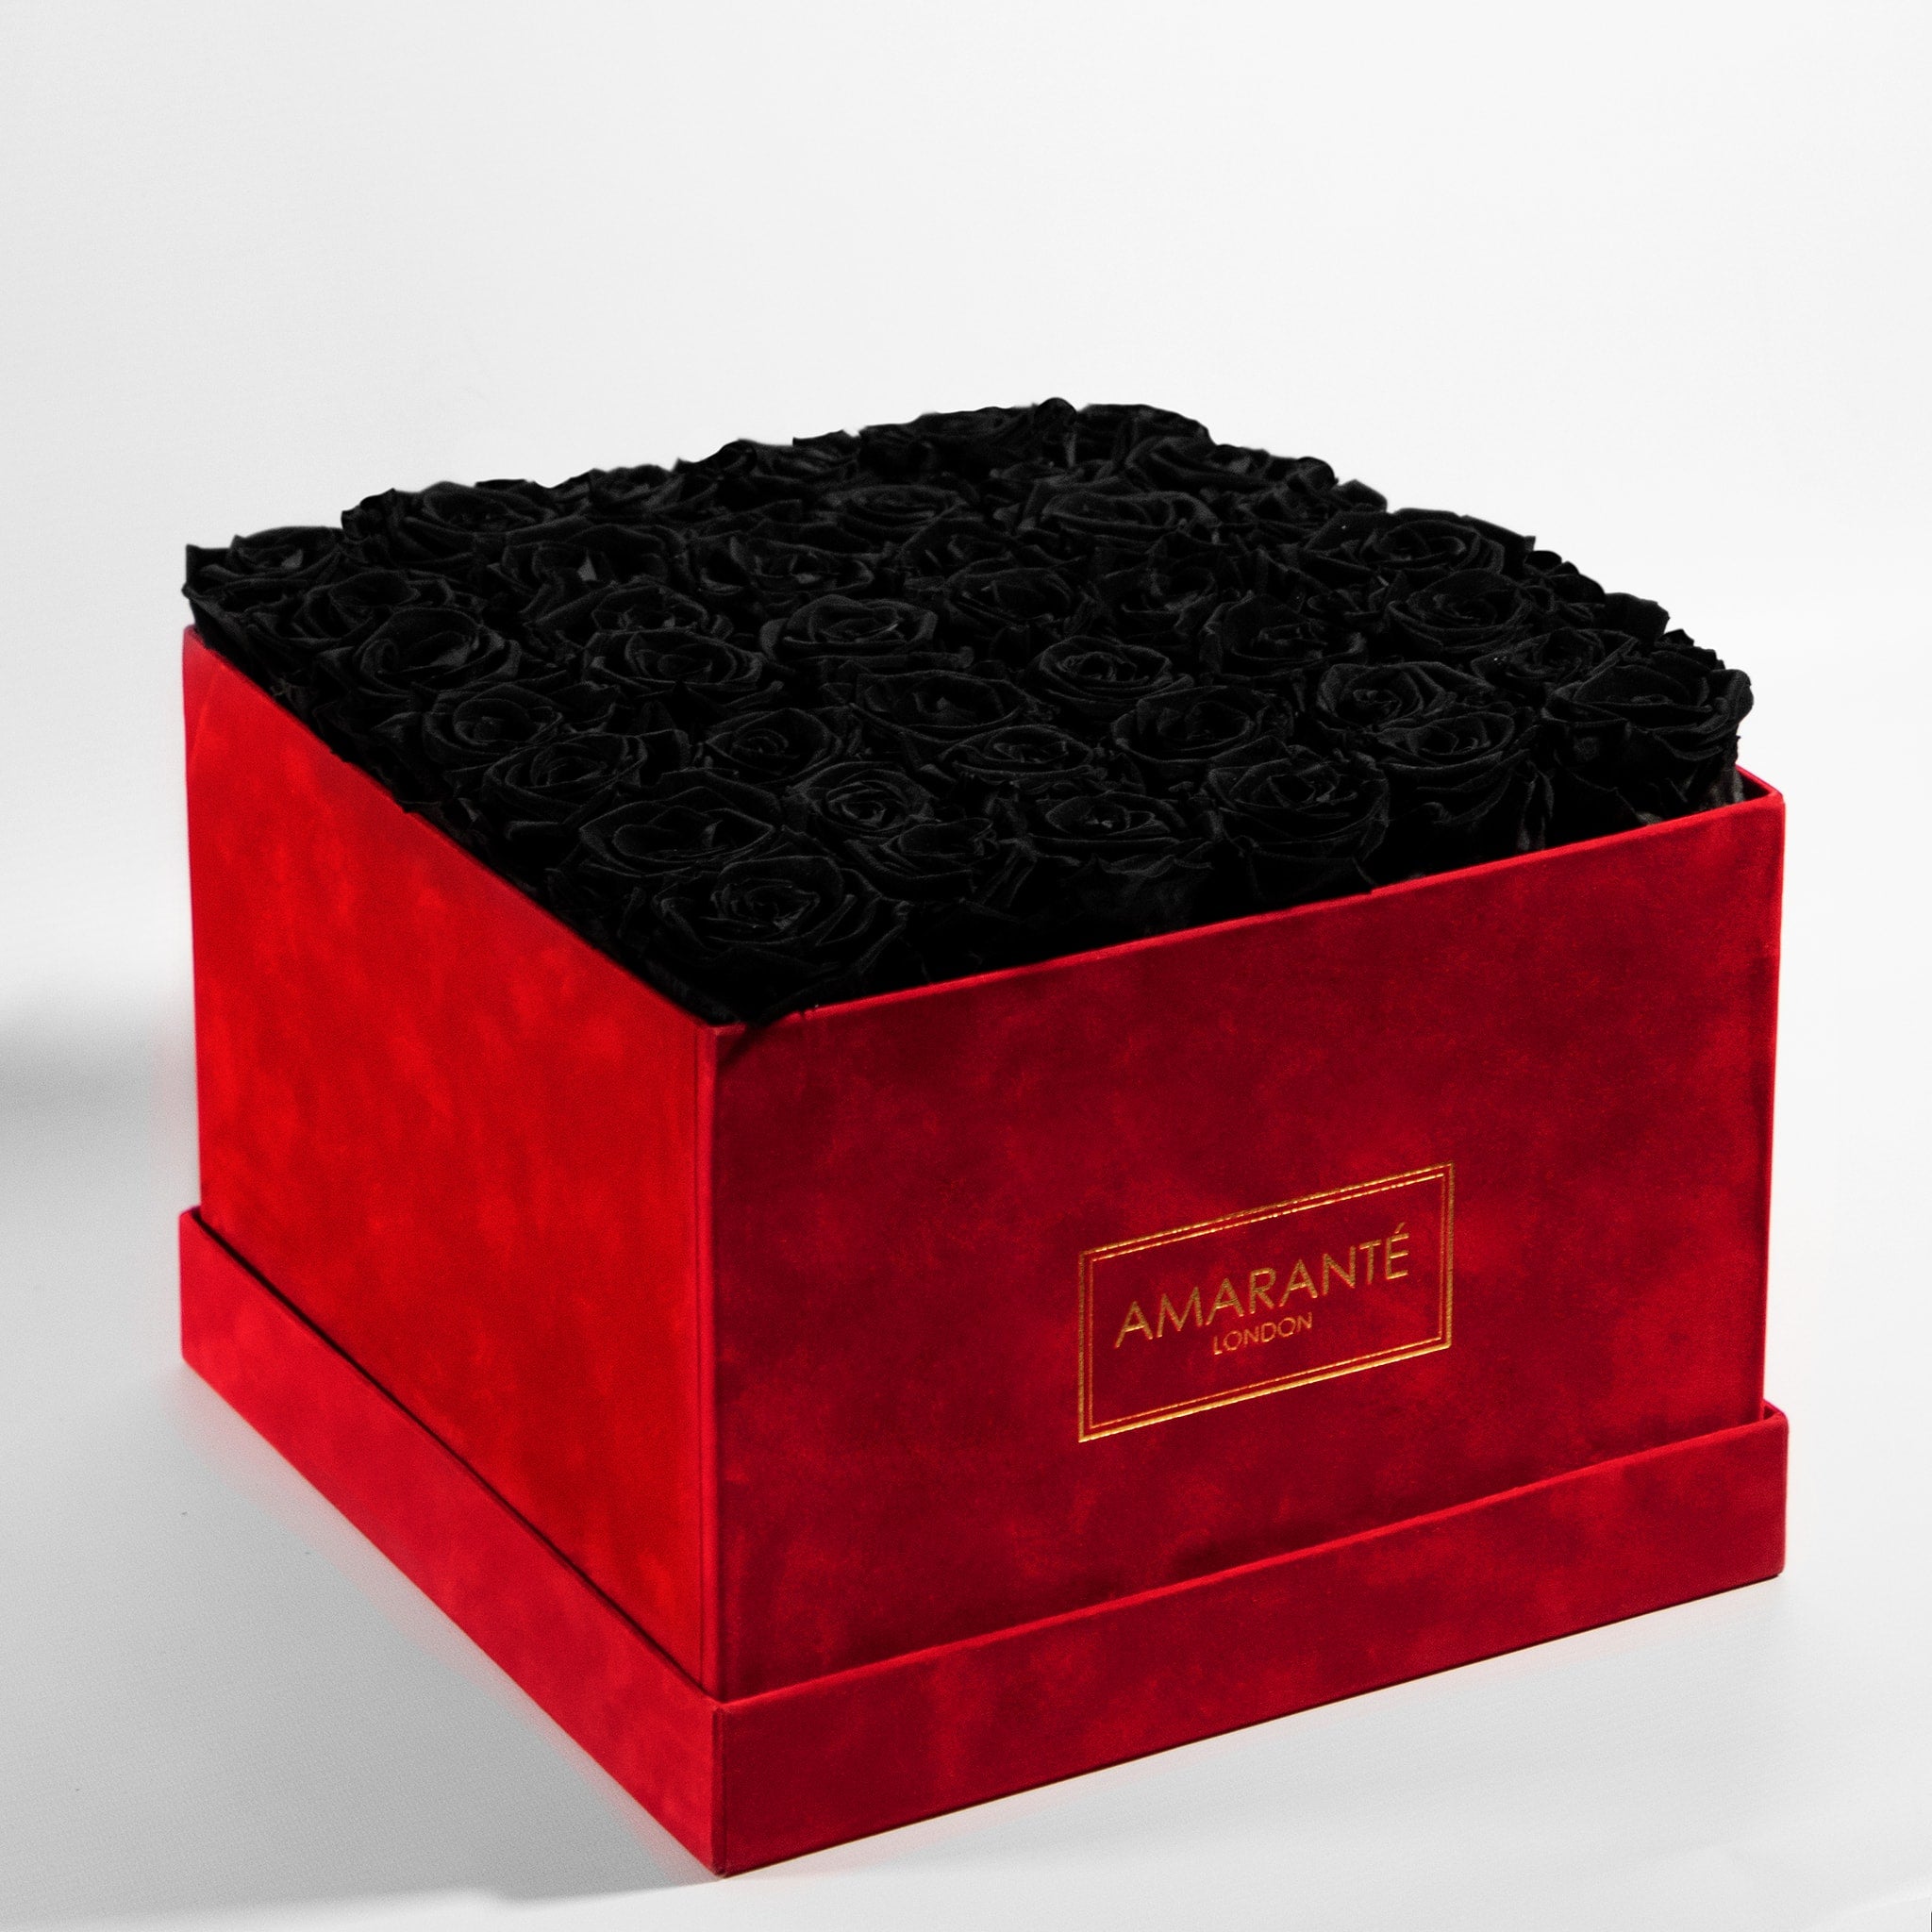 Bold black roses in a captivating red extra large box 